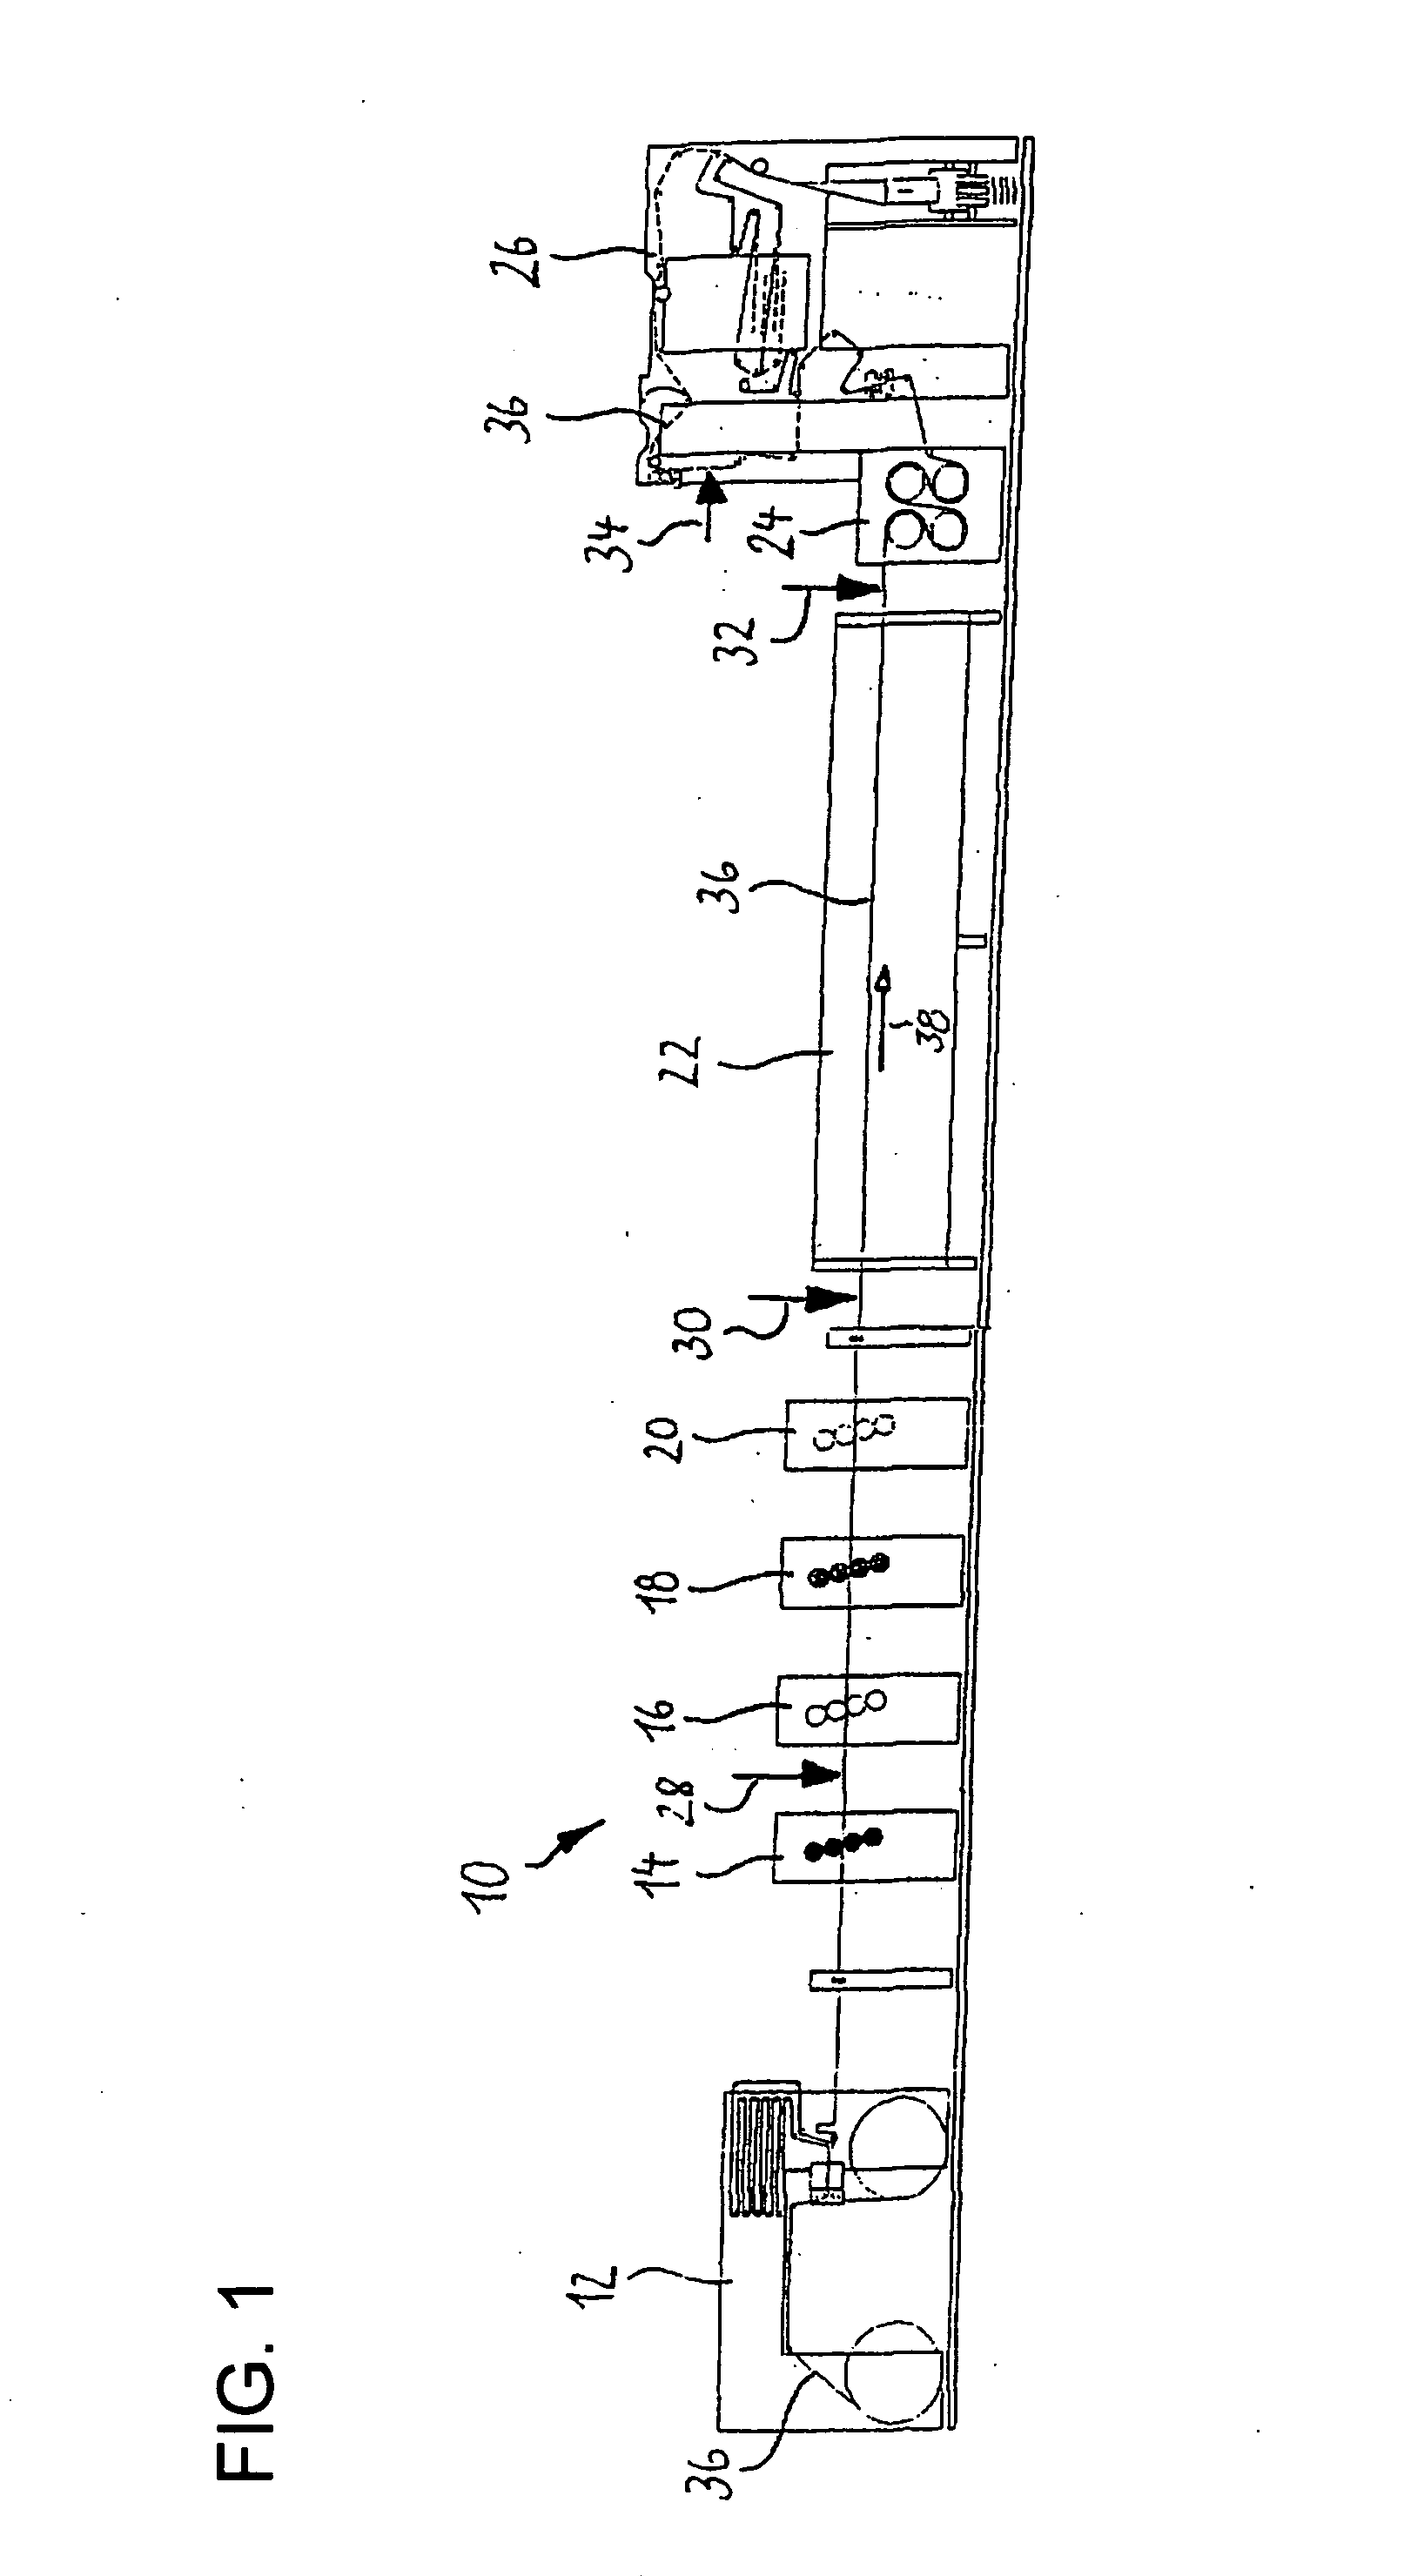 Device for inspection of print products